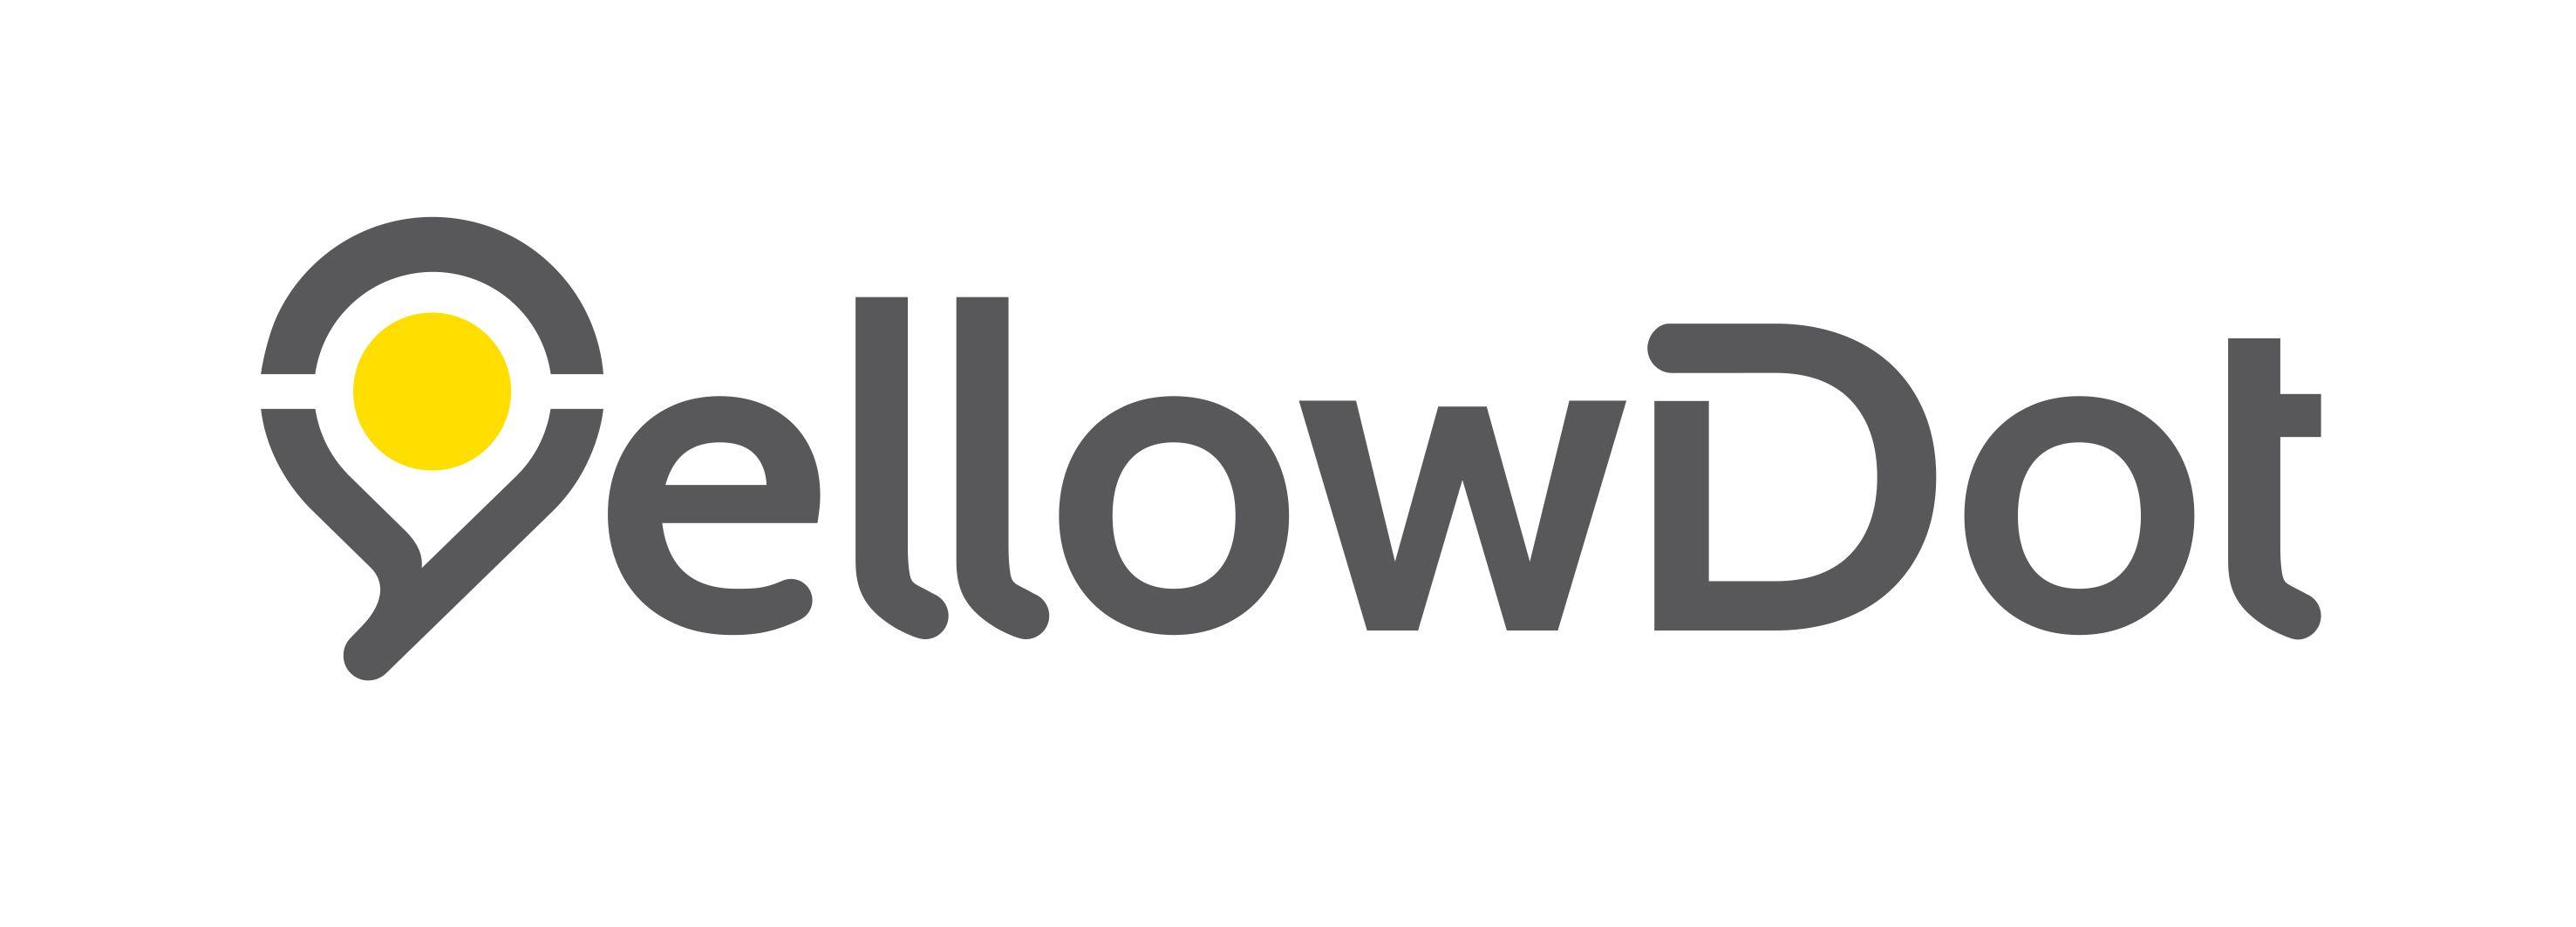 Yellow Dot Logo - Philips Lighting opens its indoor positioning technology to other ...